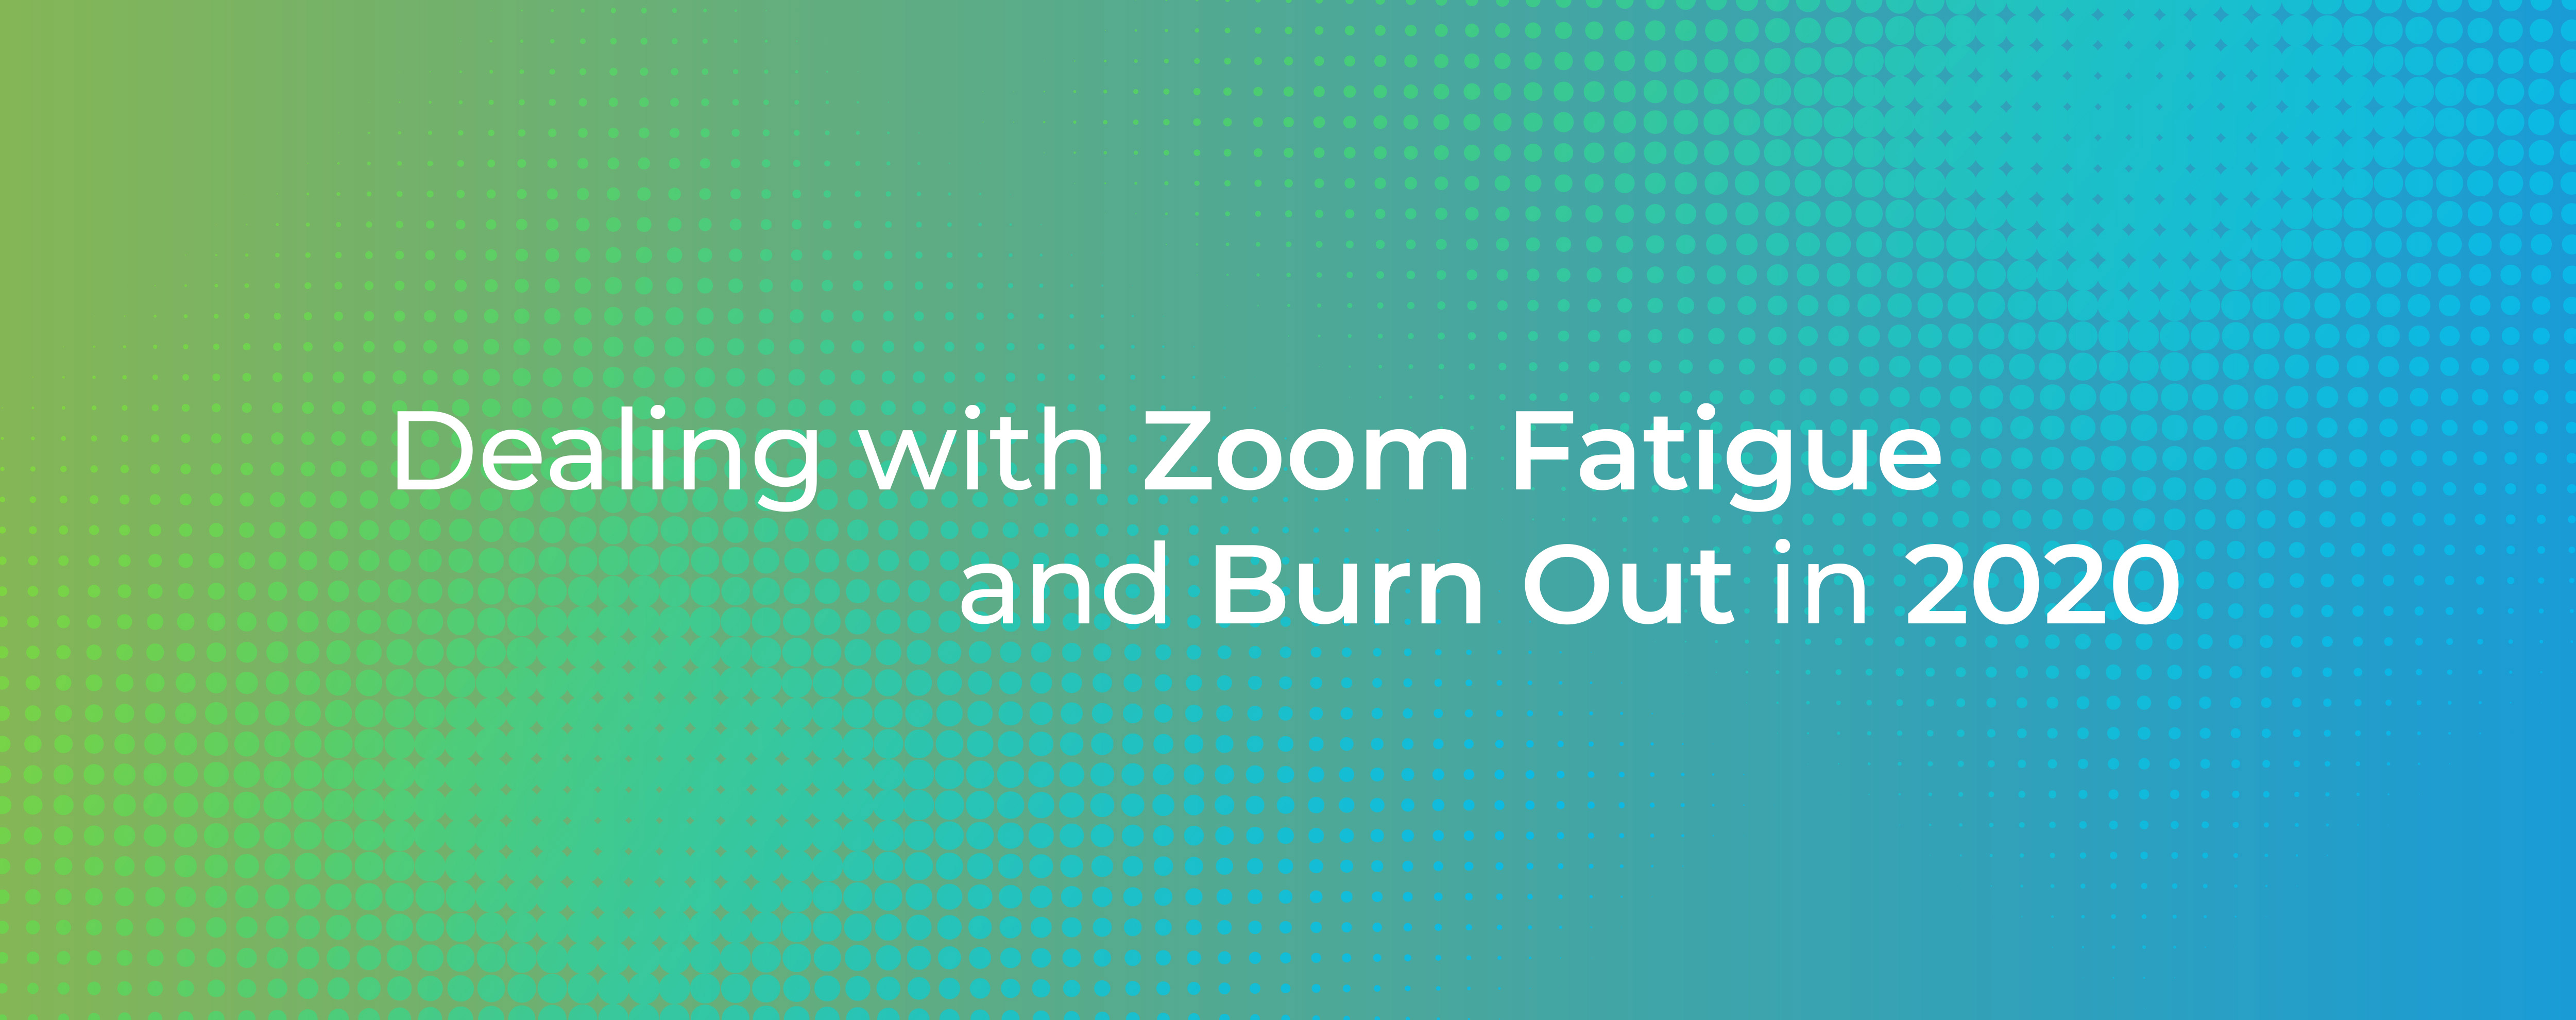 Dealing with Zoom Fatigue and Burn Out in 2020